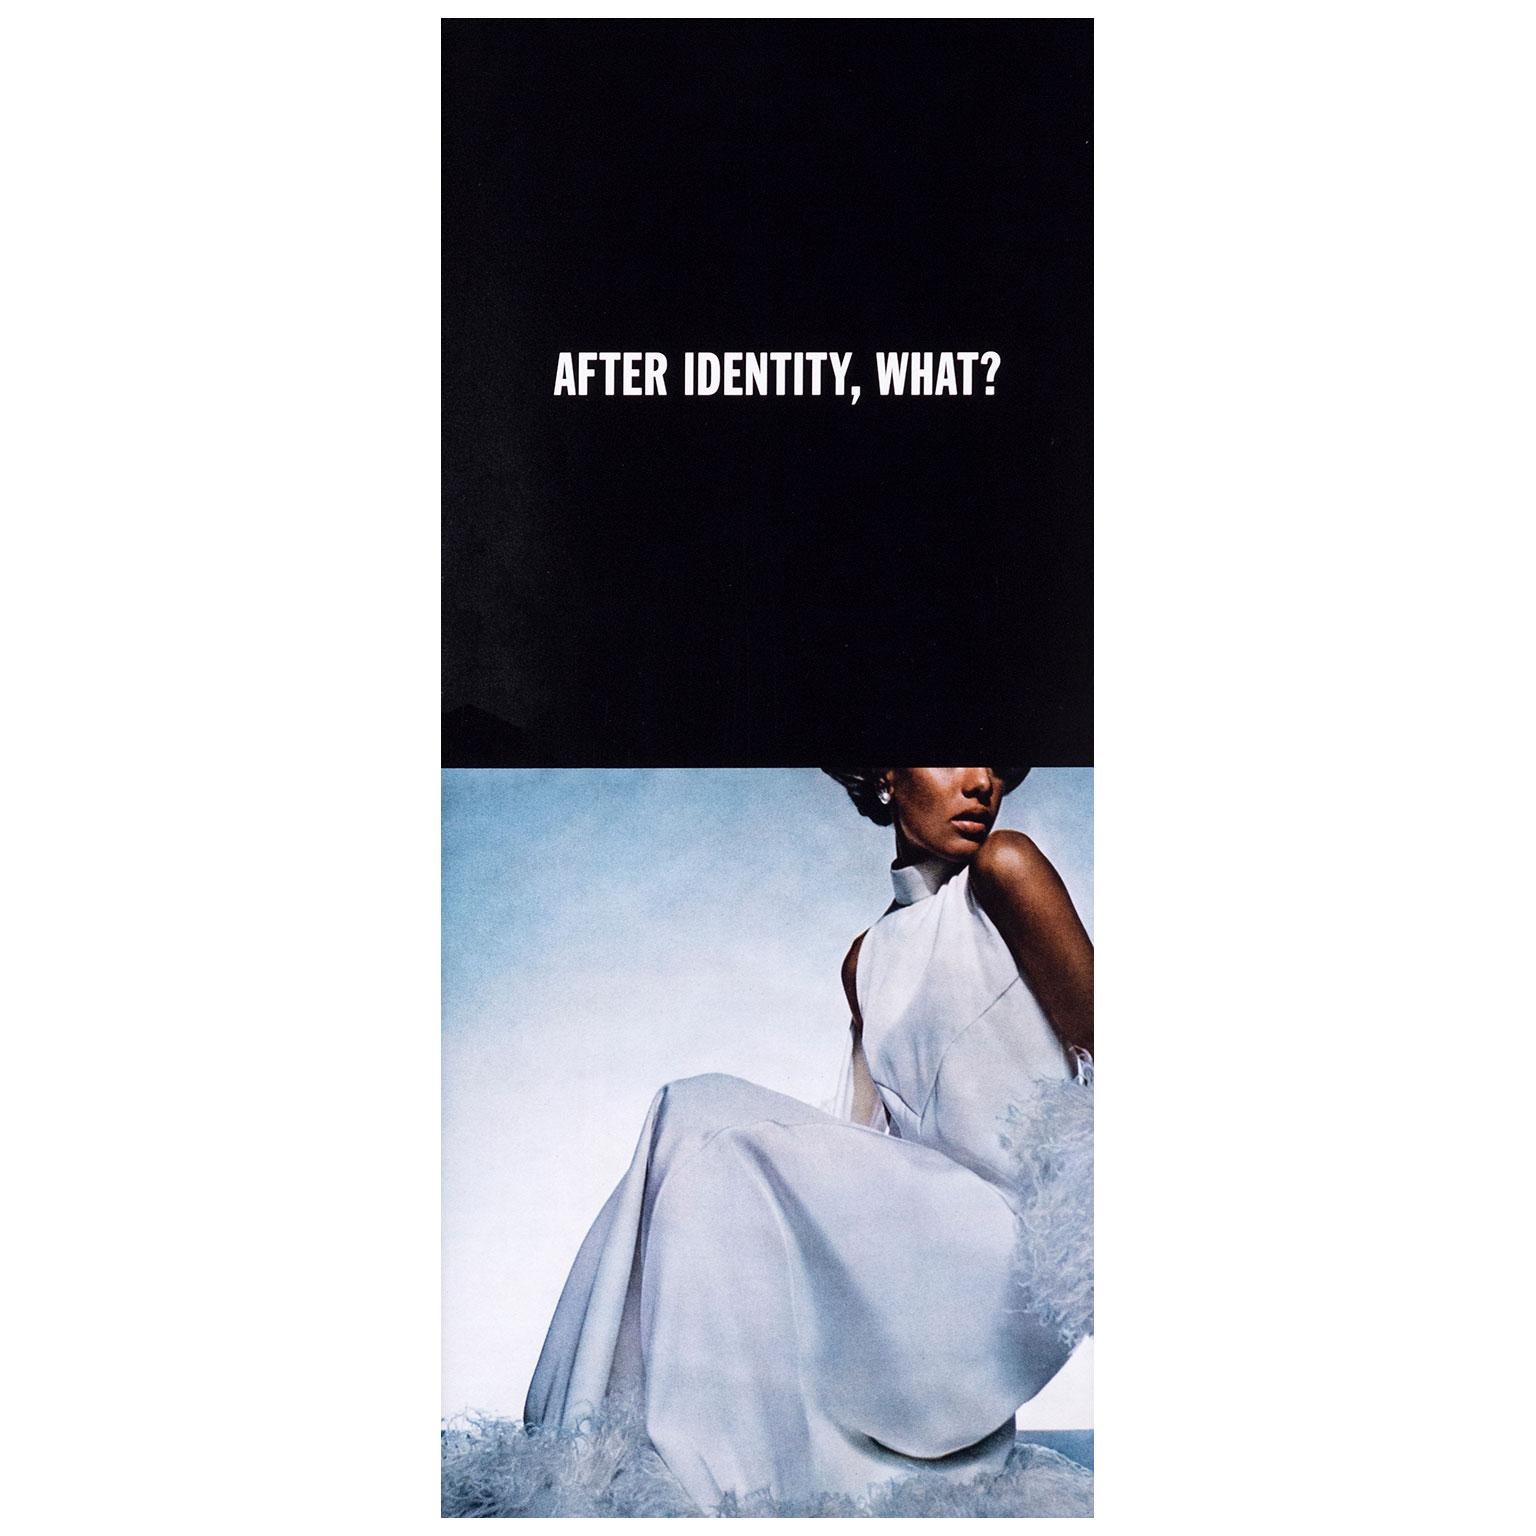 After Identity, What? - Print by Hank Willis Thomas